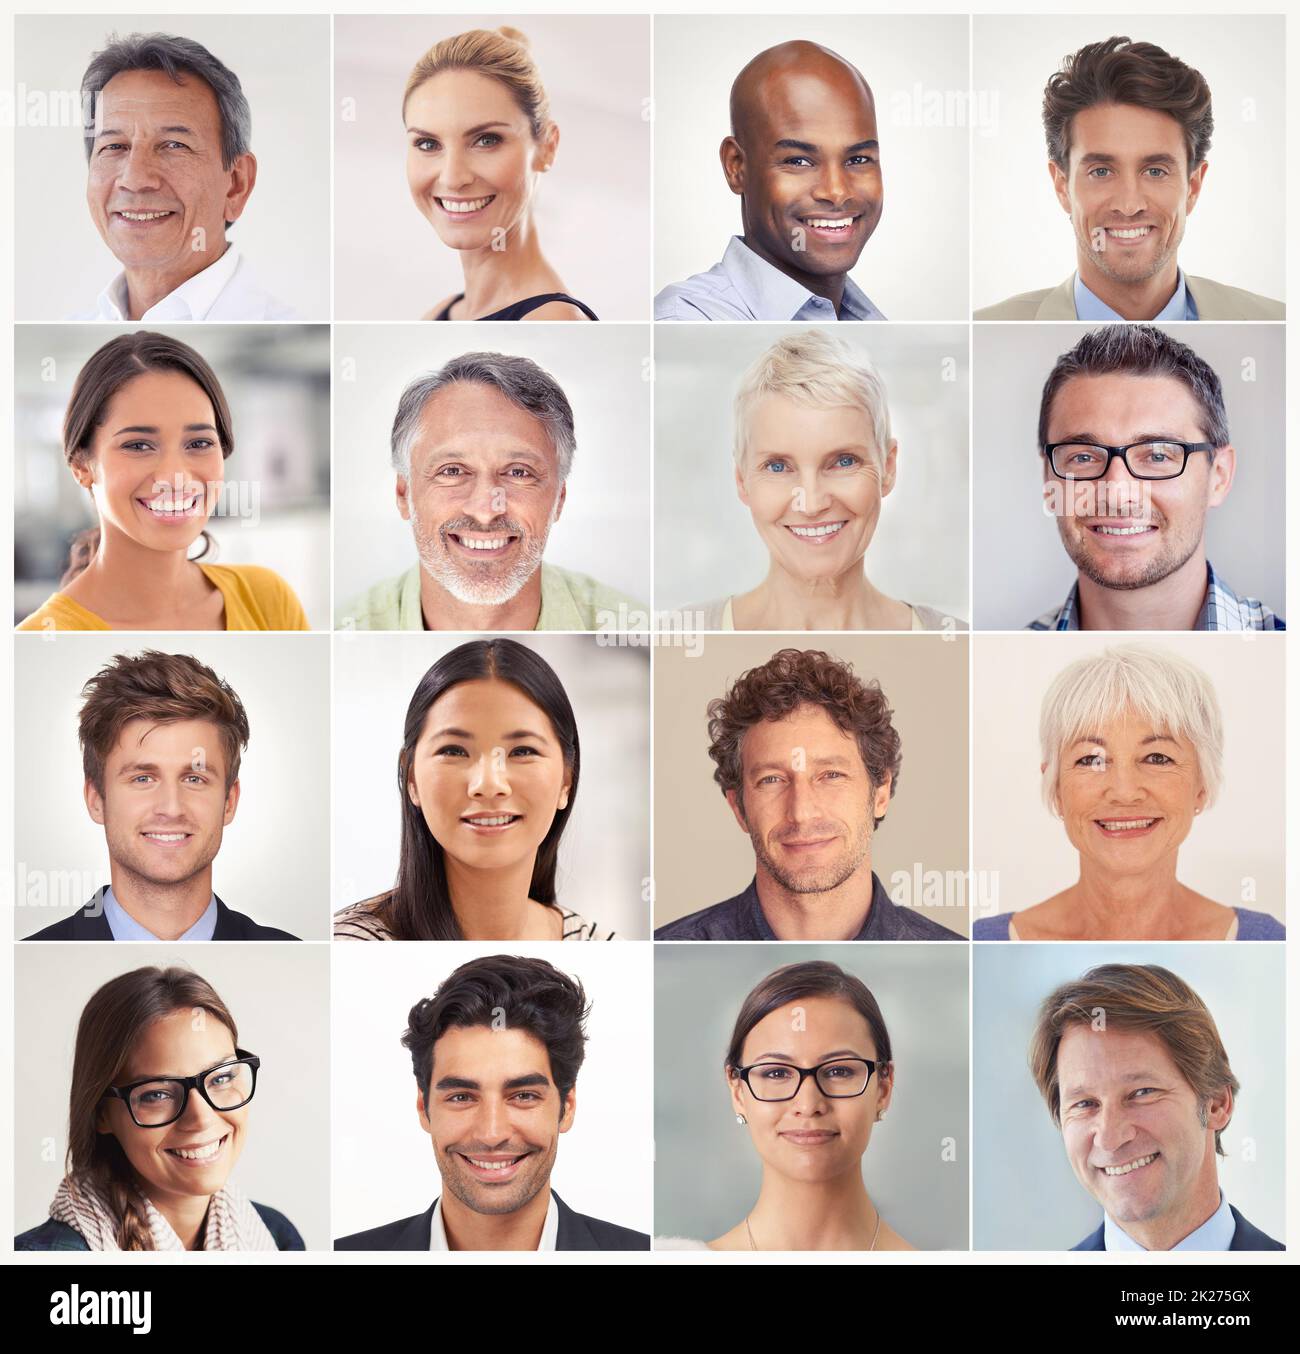 We believe in a better future. A cropped shot of people from different countries smiling together in a multitude of portraits. Stock Photo